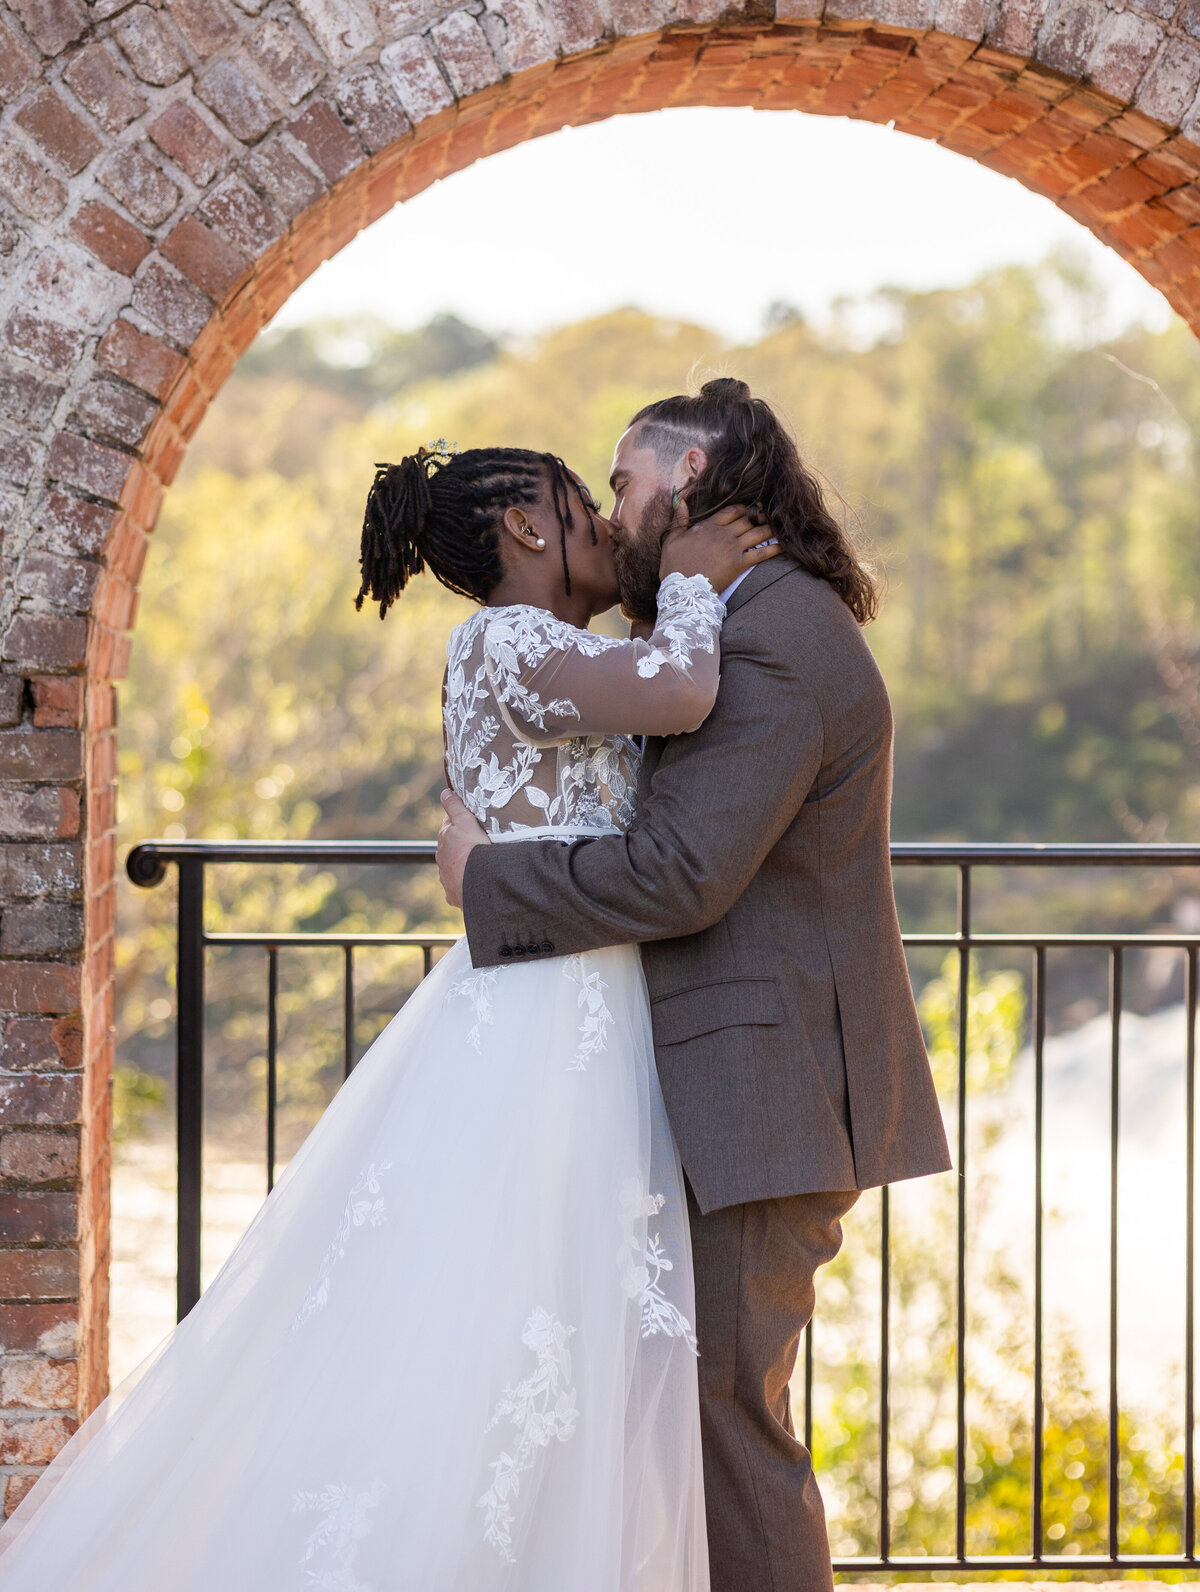 black bride wearing a lace dress and white groom wearing brown suit  kissing with waterfall behind them at The Bibb Mill by Columbus Georgia wedding photographer Amanda Richardson Photography